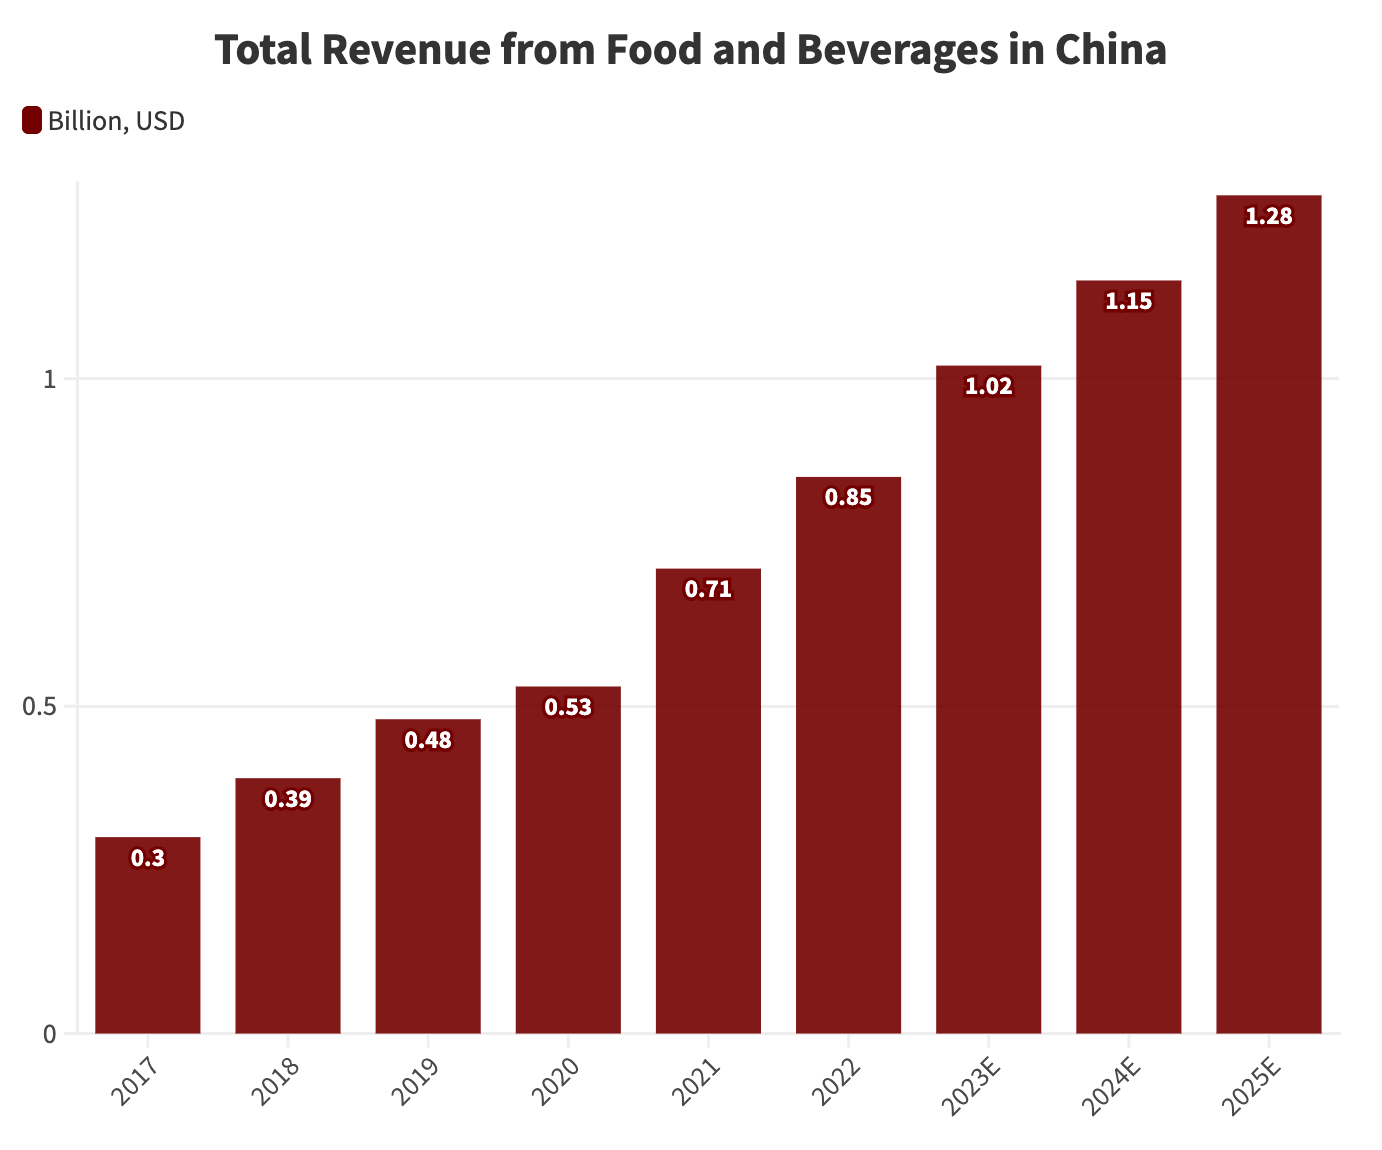 Total-Revenue-from-F&B-in-China